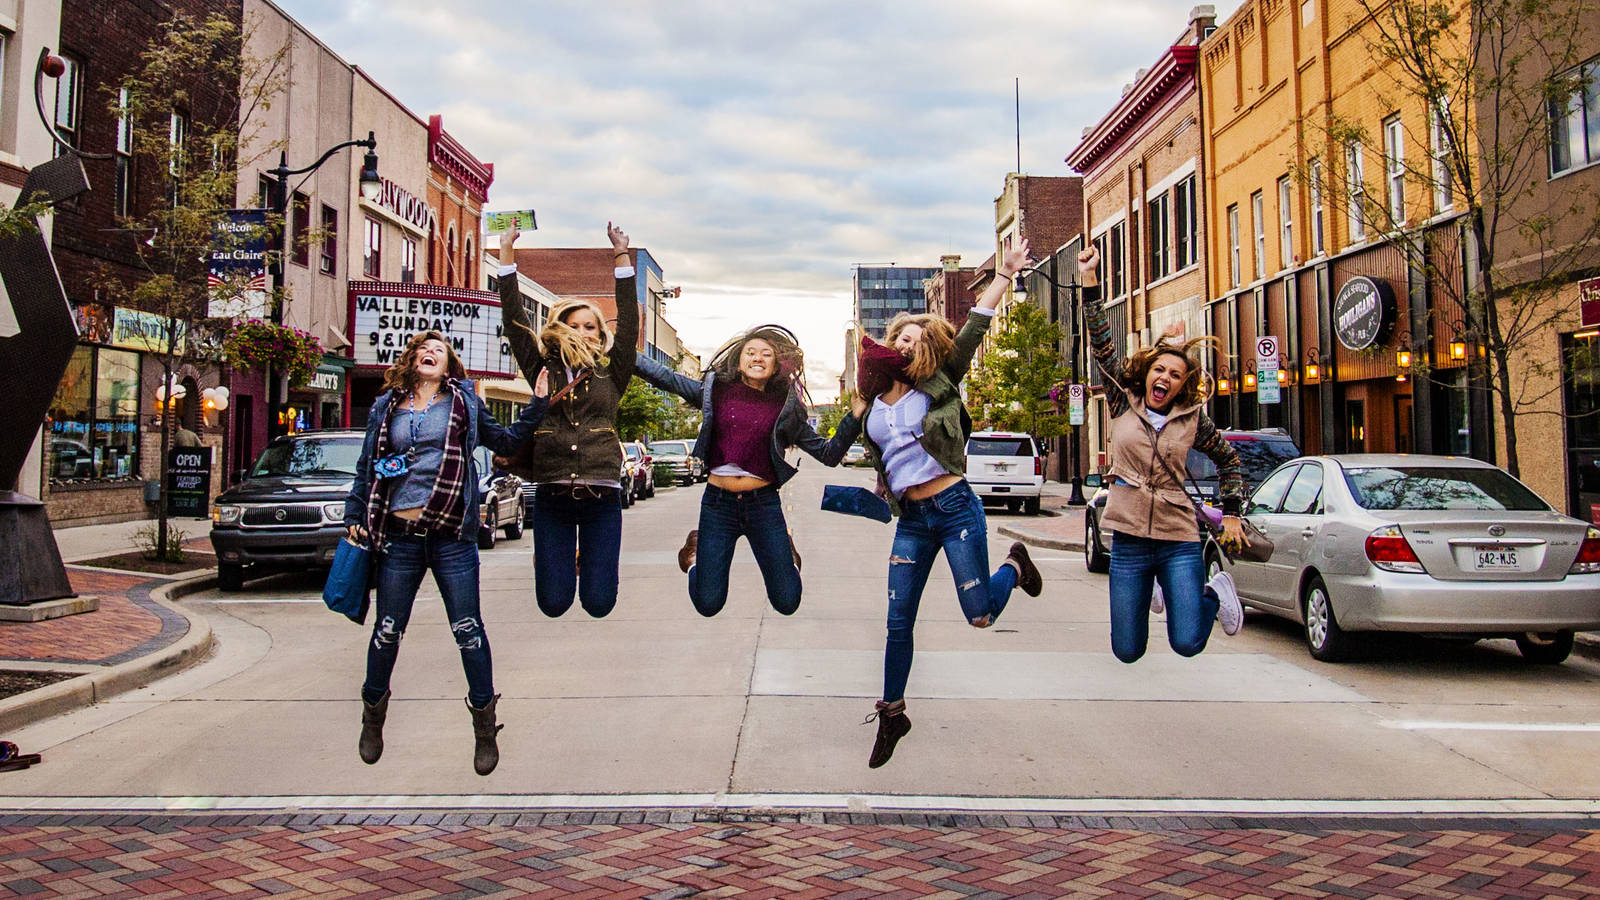 Blugolds jumping in street downtown for UW meets EC